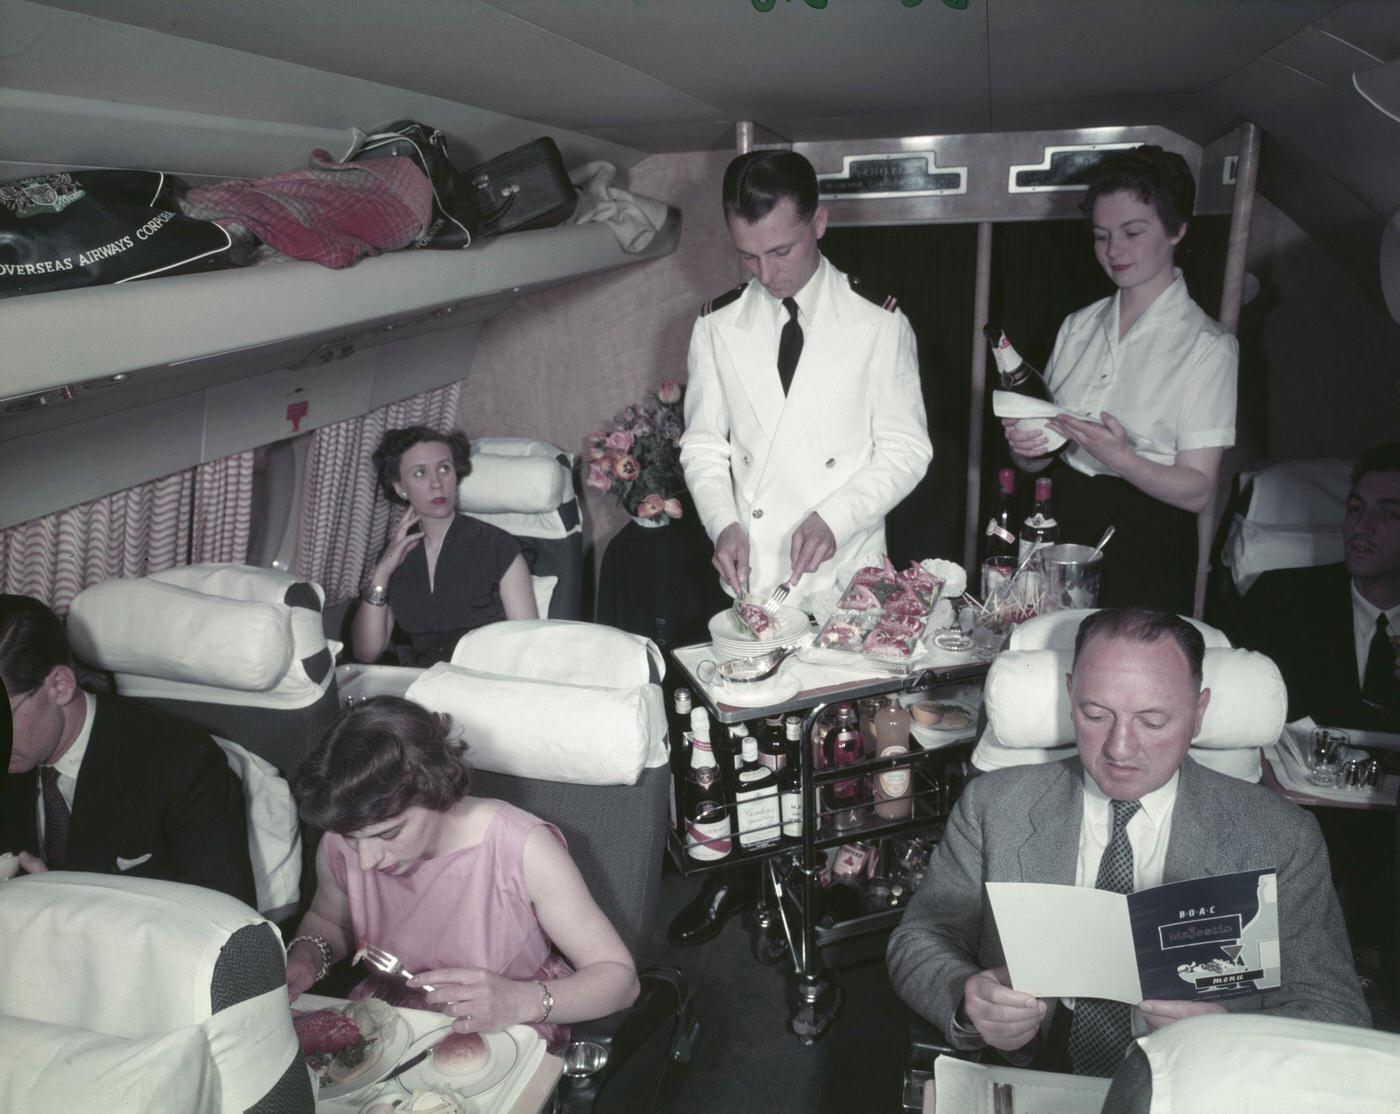 In October 1956, a male air steward and female air stewardess serve food and drinks from a trolley to passengers on board a Bristol Britannia medium to long range airliner.